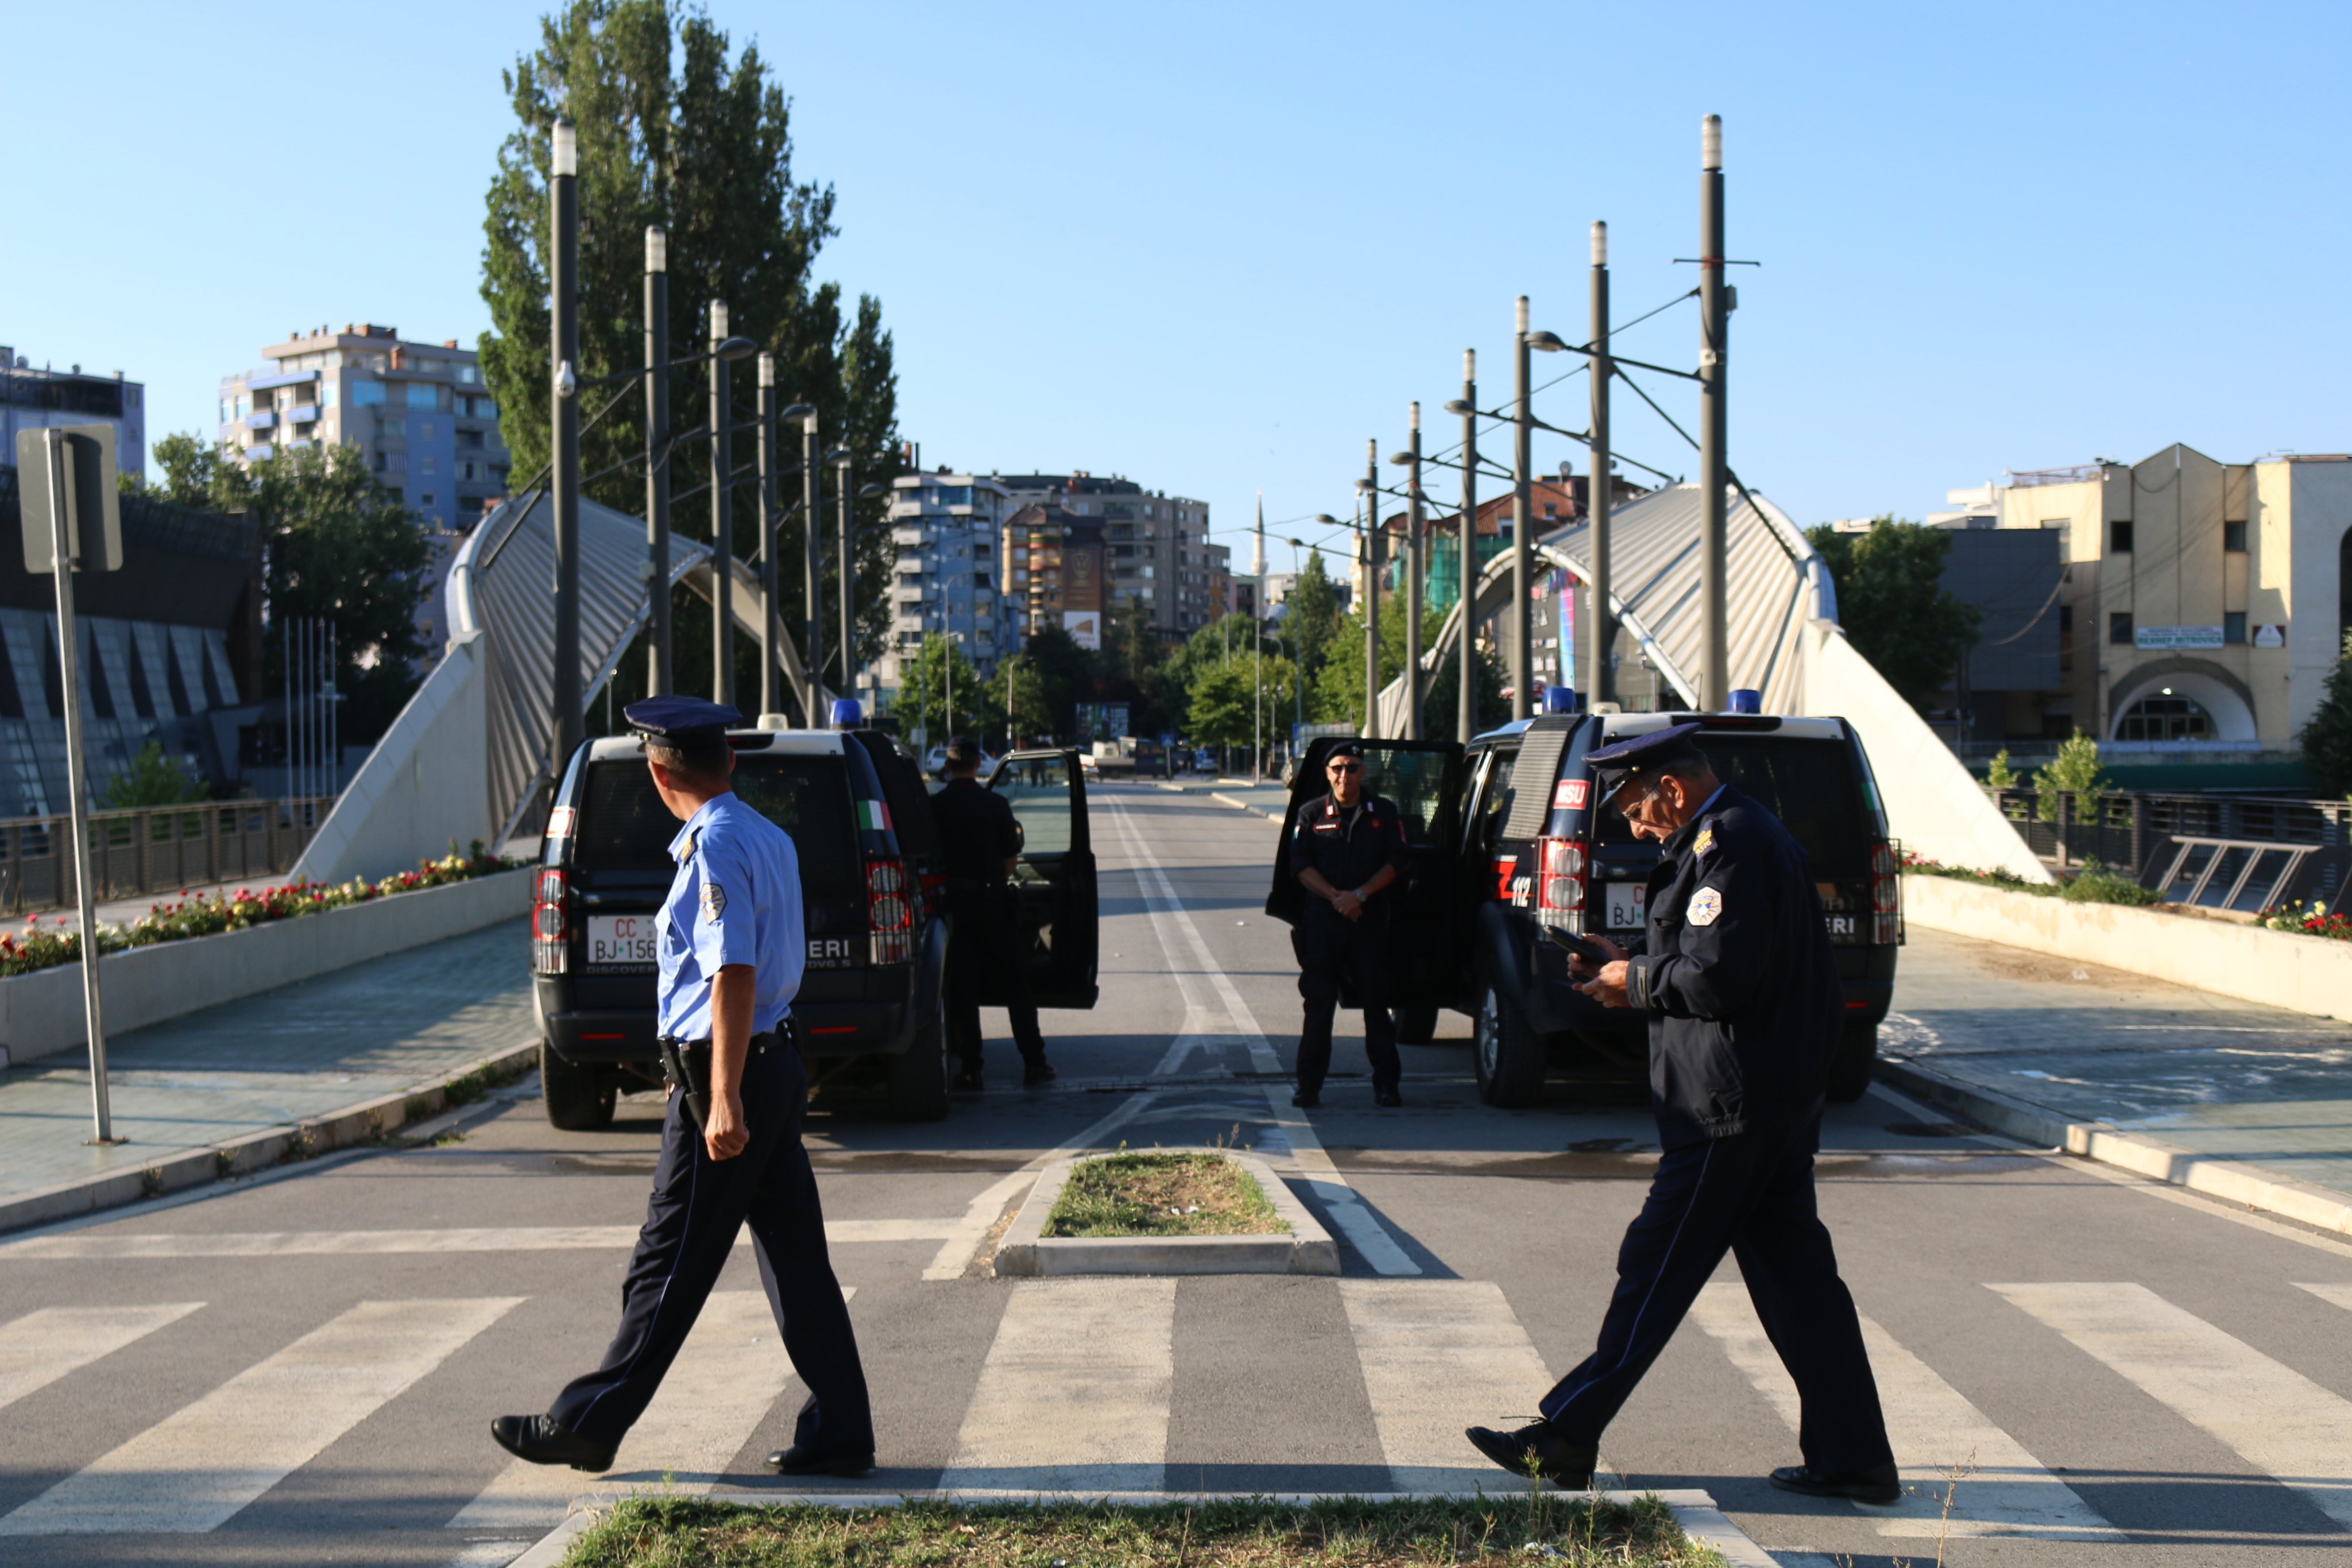 Kosovo postpones decisions on Serbian ID cards, license plates after heightened border tensions